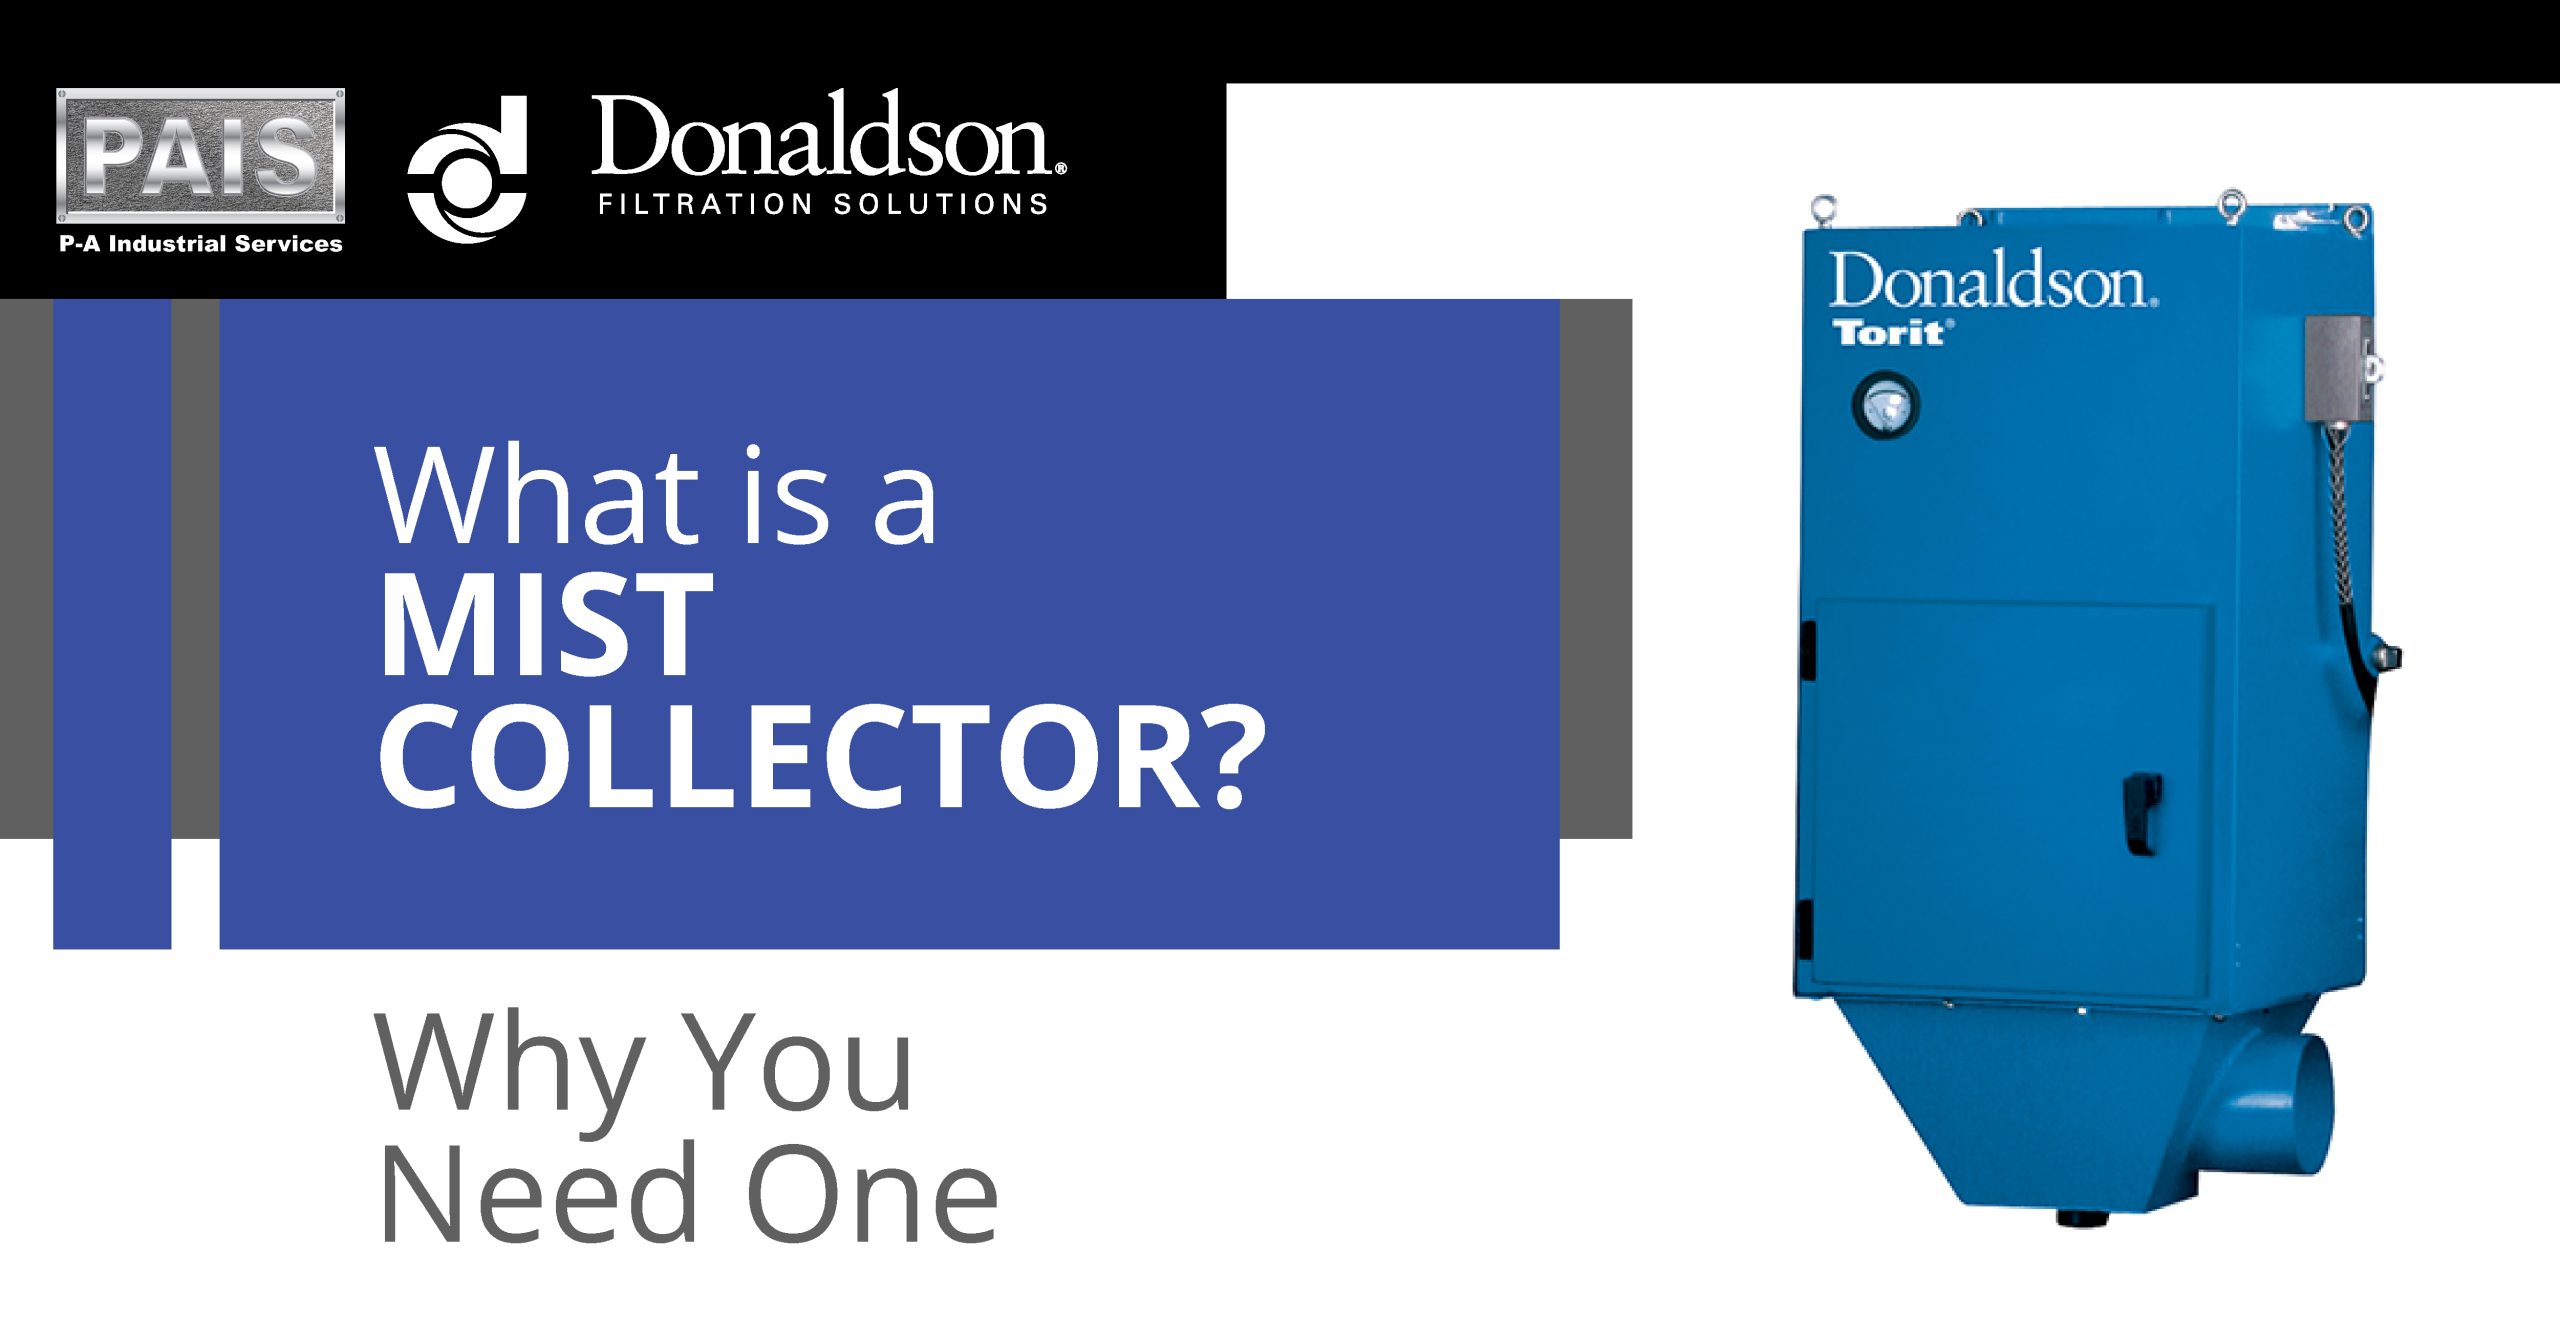 what is a mist collector, and why you need one